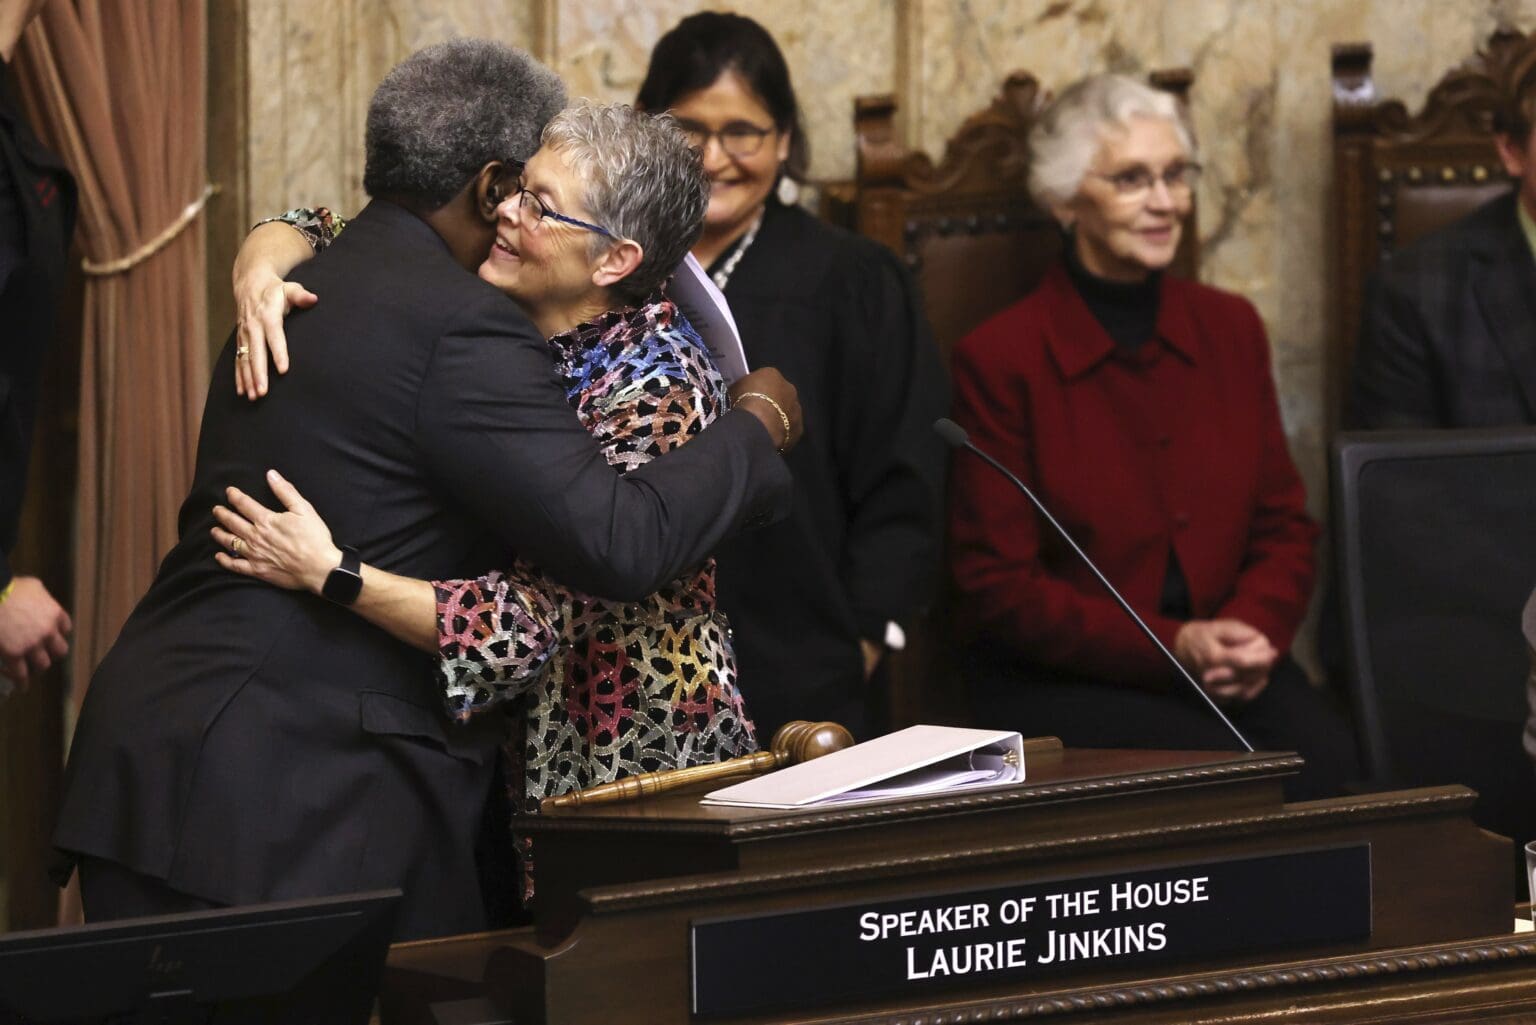 Speaker of the House Laurie Jinkins hugs Pastor Gregory Christopher from the Shiloh Baptist Church in Tacoma on the first day of the legislative session at the Washington state Capitol in Olympia